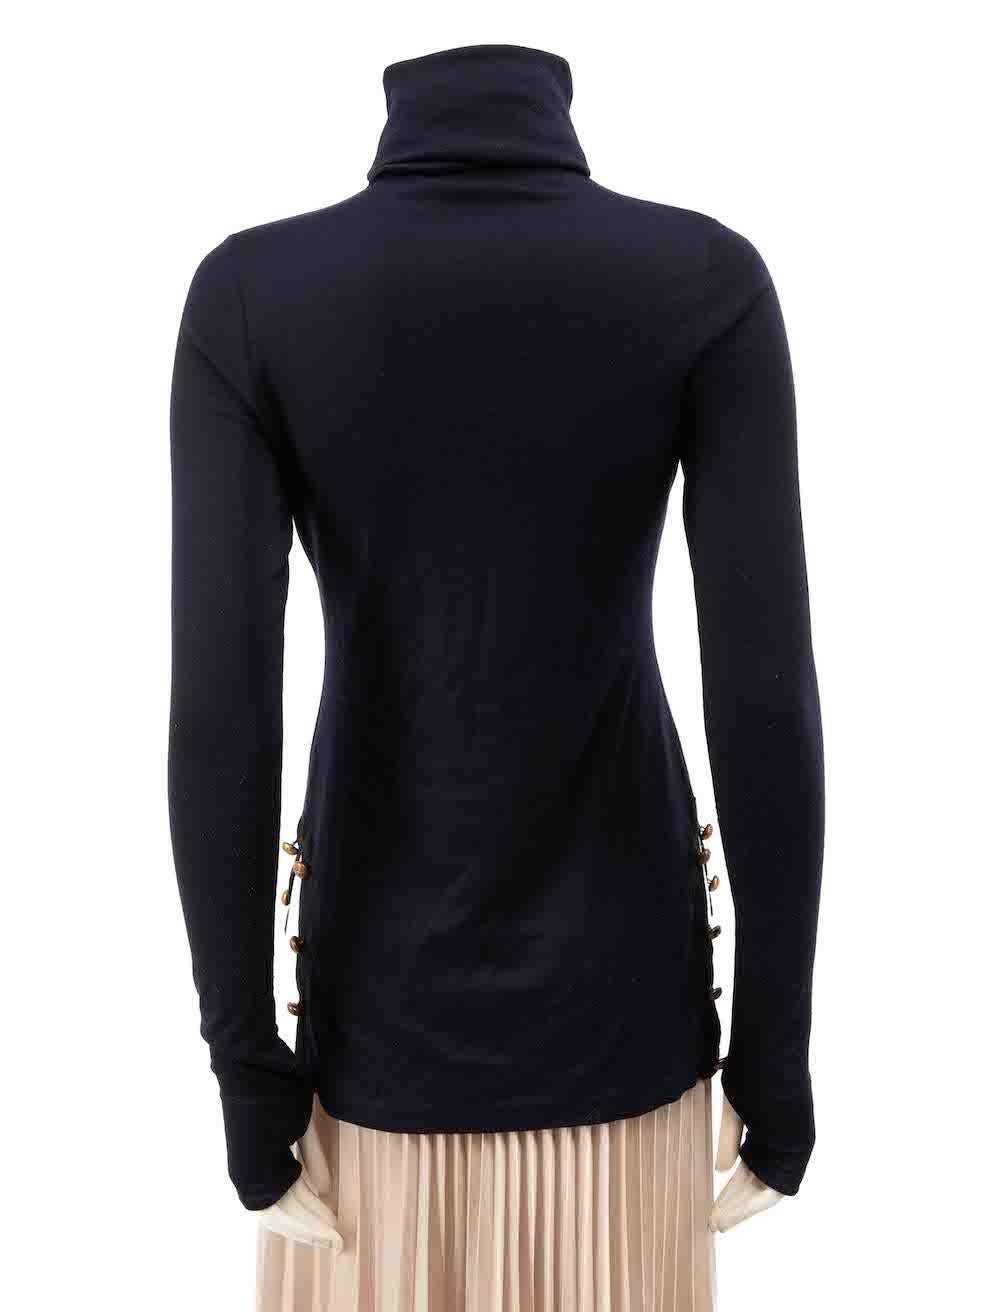 Alexander McQueen Navy Button Detail Turtleneck Top Size S In Excellent Condition For Sale In London, GB